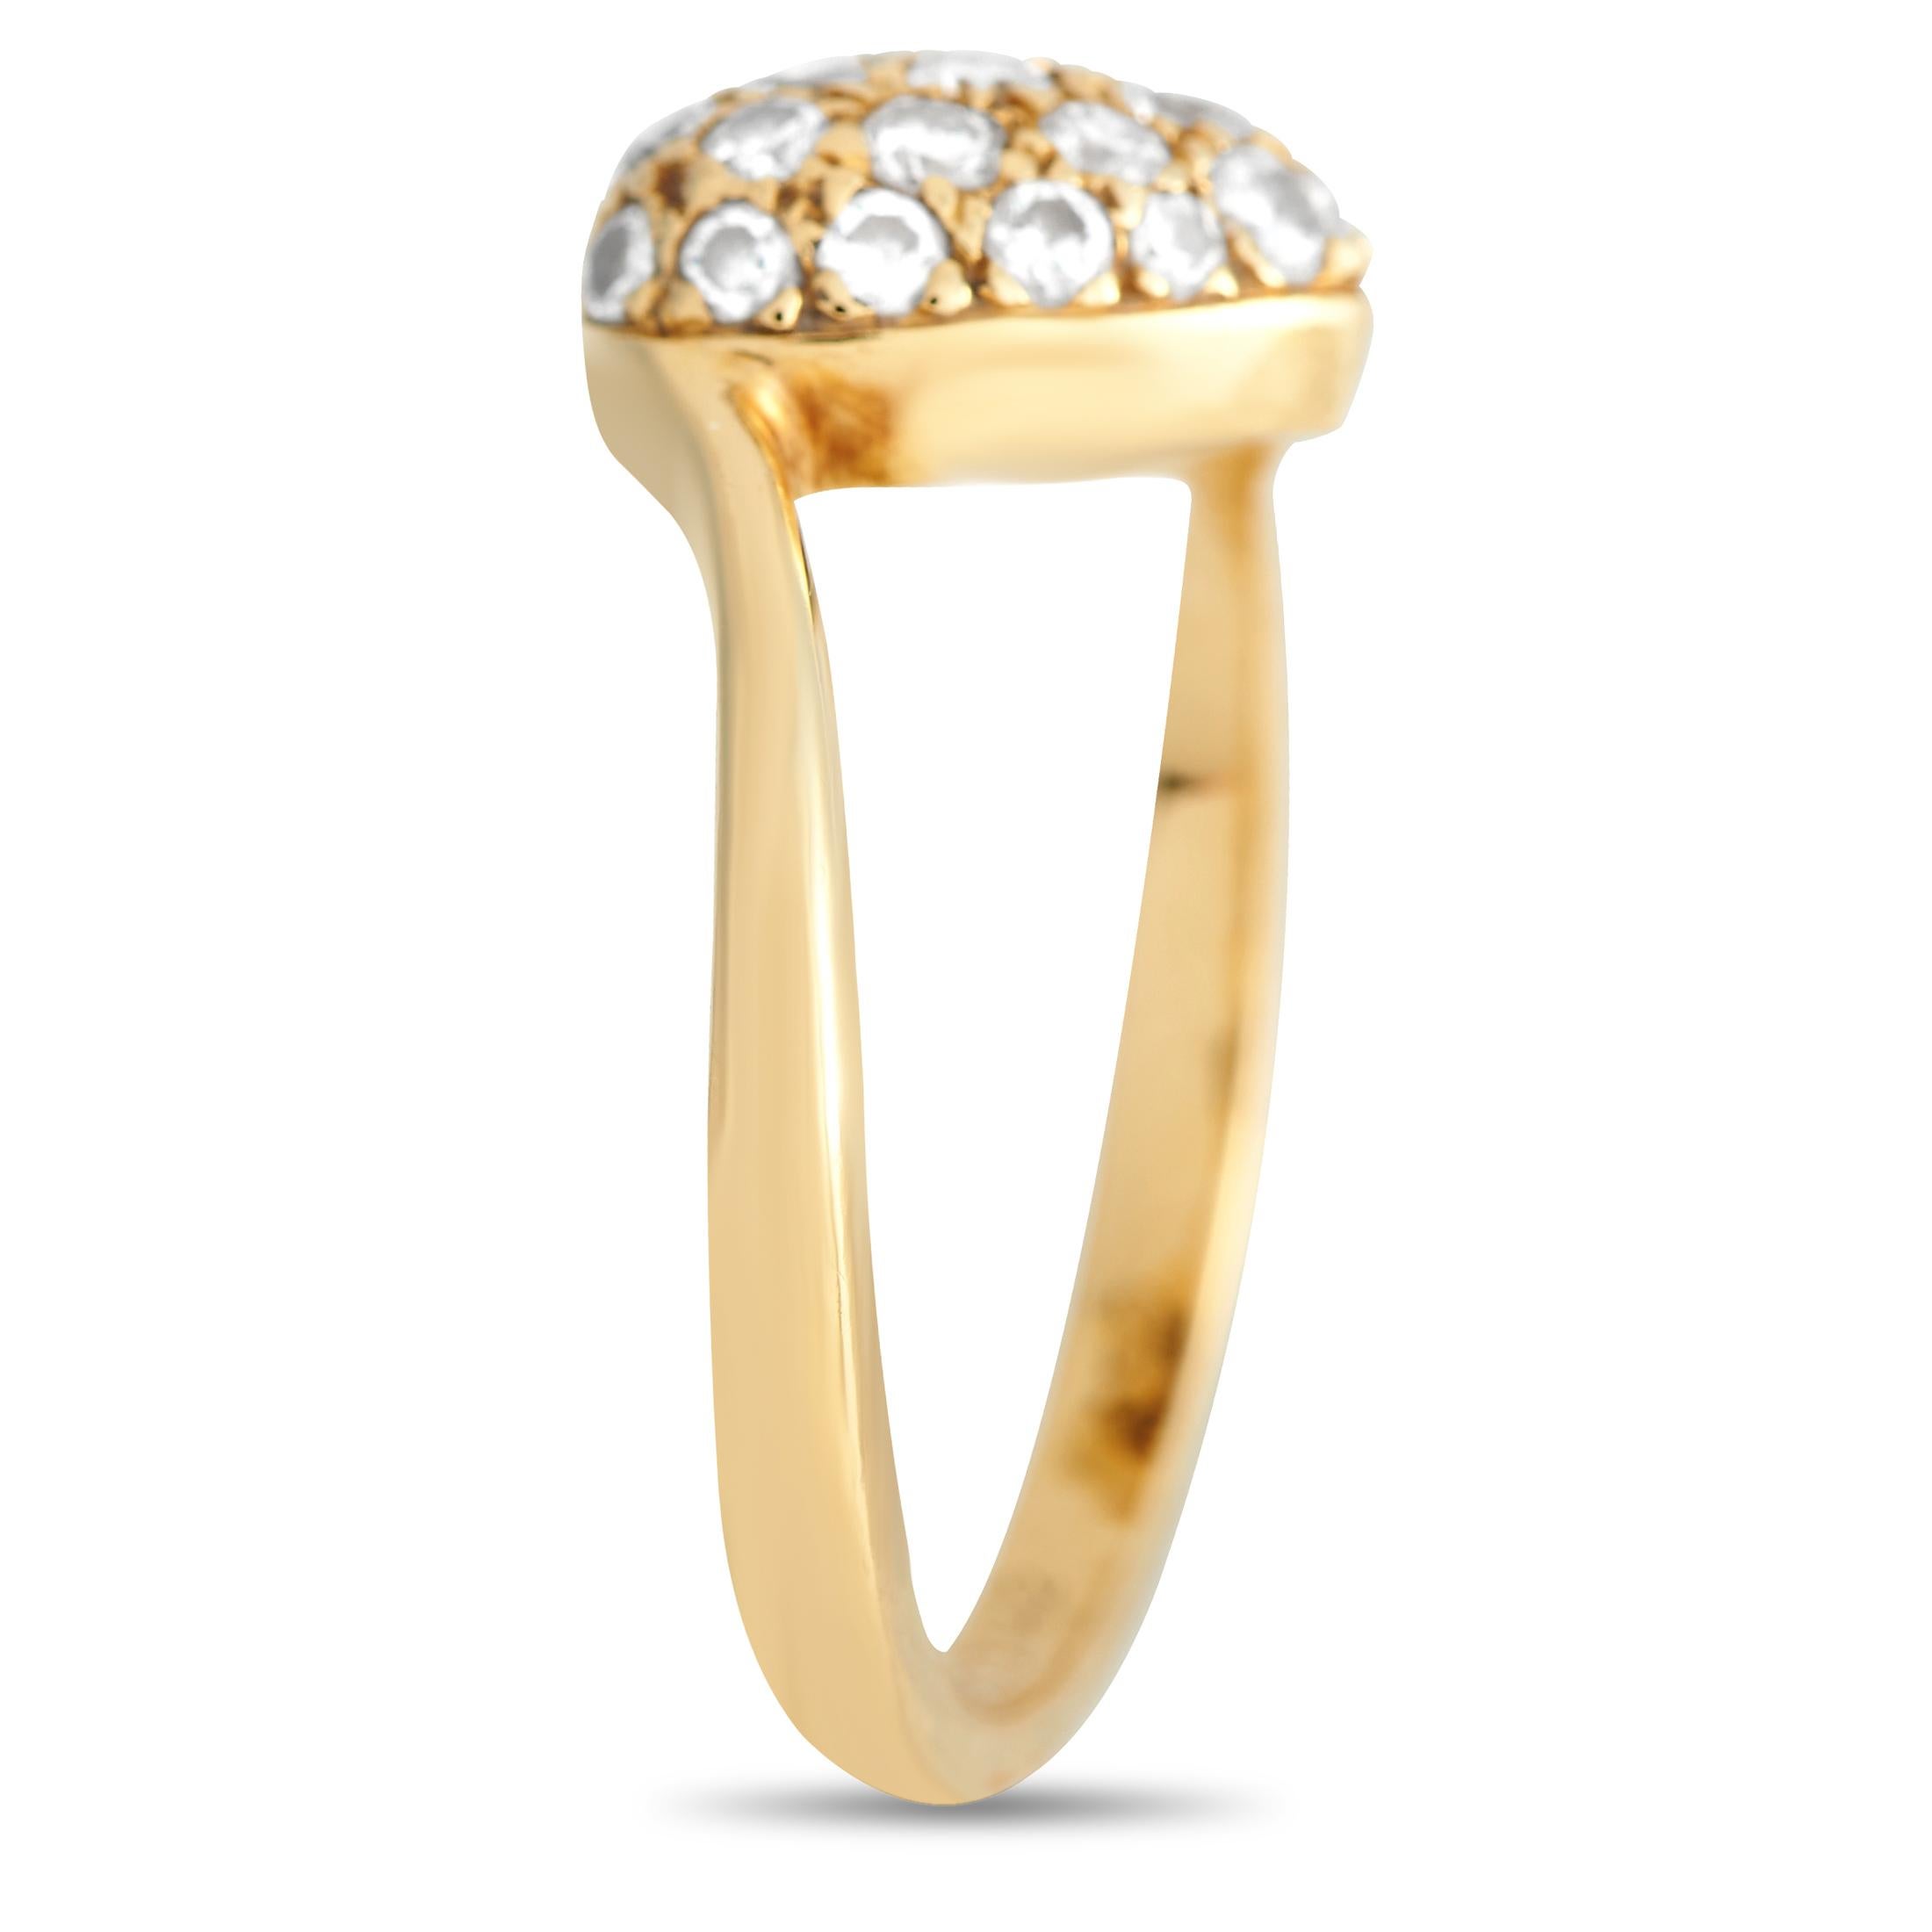 Dazzle your special someone with this shiny symbol of love. This Cartier ring features an 18K yellow gold bypass shank holding a heart-shaped motif in a tension-like setting. Brilliant diamonds of varying sizes give a radiant glow to the